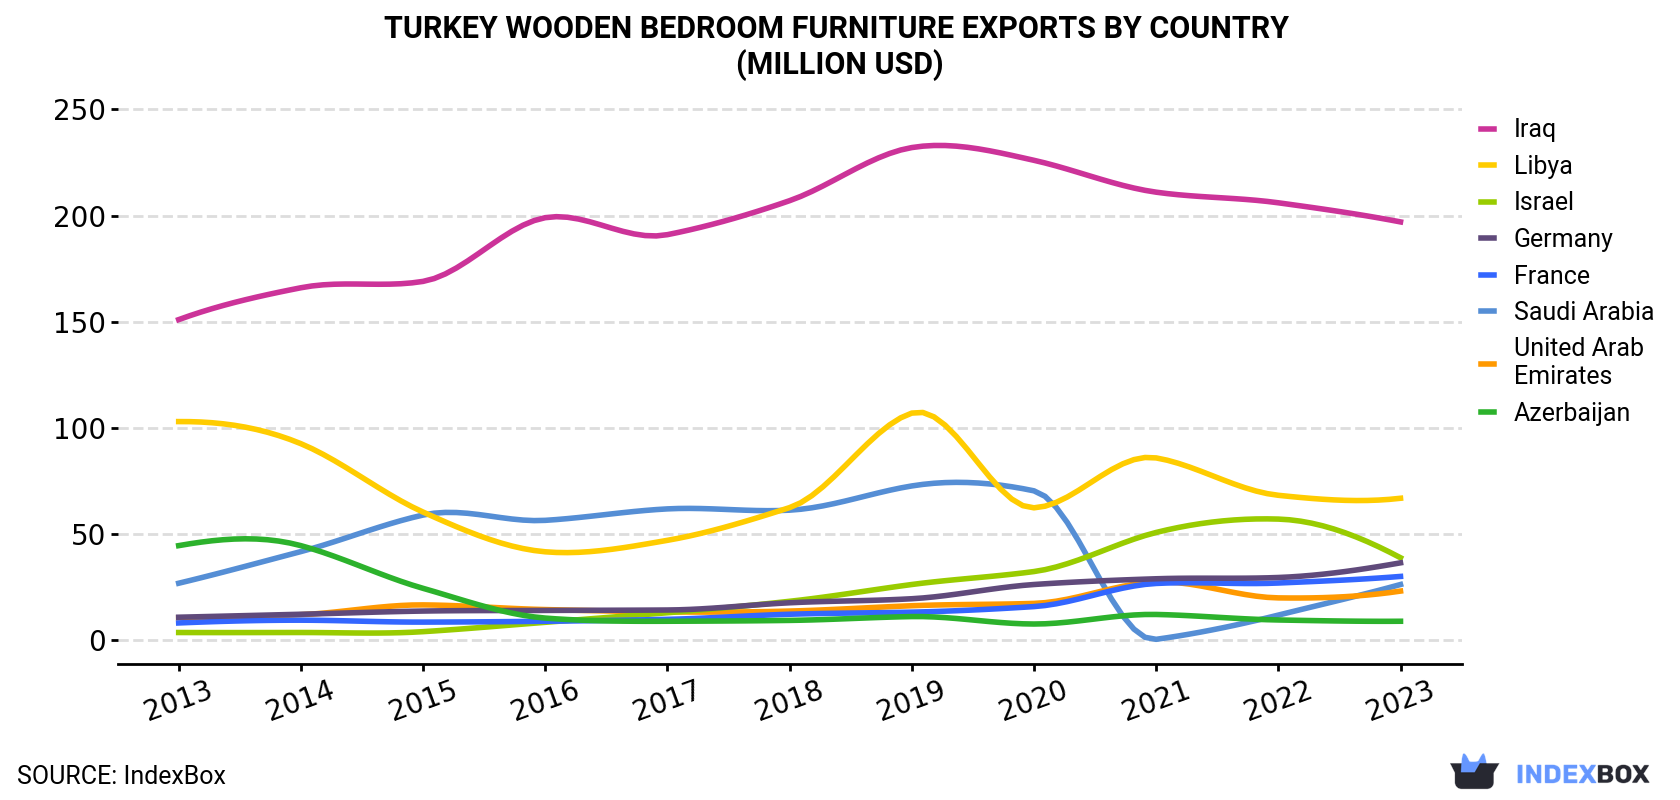 Turkey Wooden Bedroom Furniture Exports By Country (Million USD)